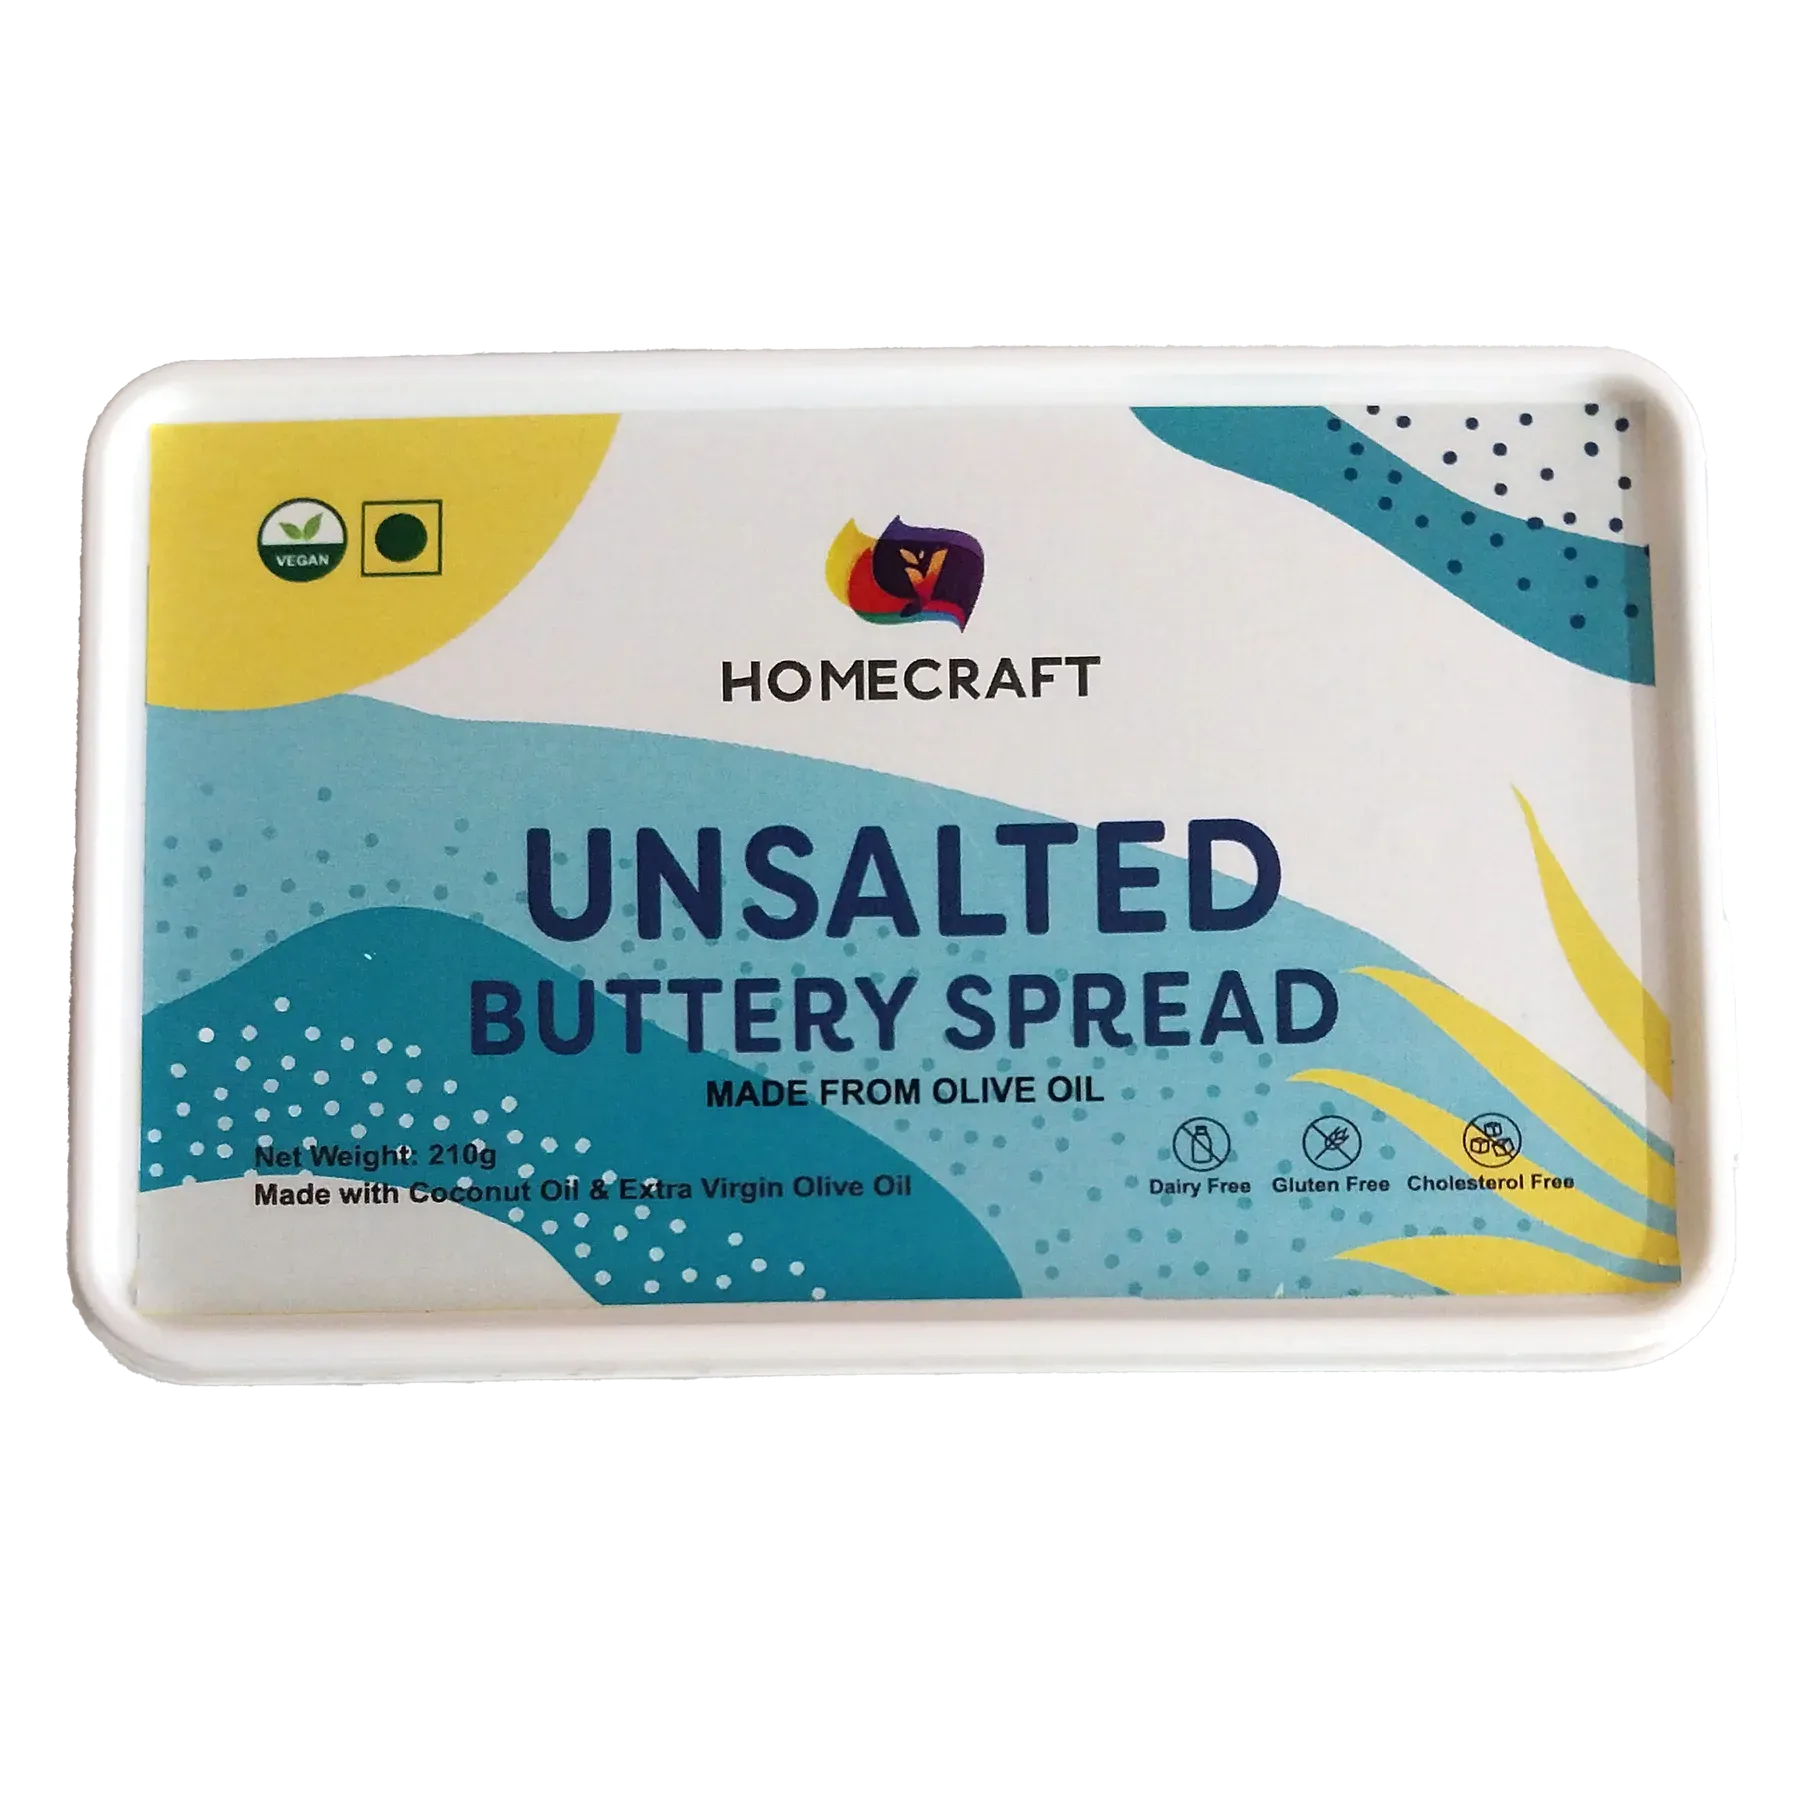 Homecraft Unsalted Buttery Spread Olive Oil Image